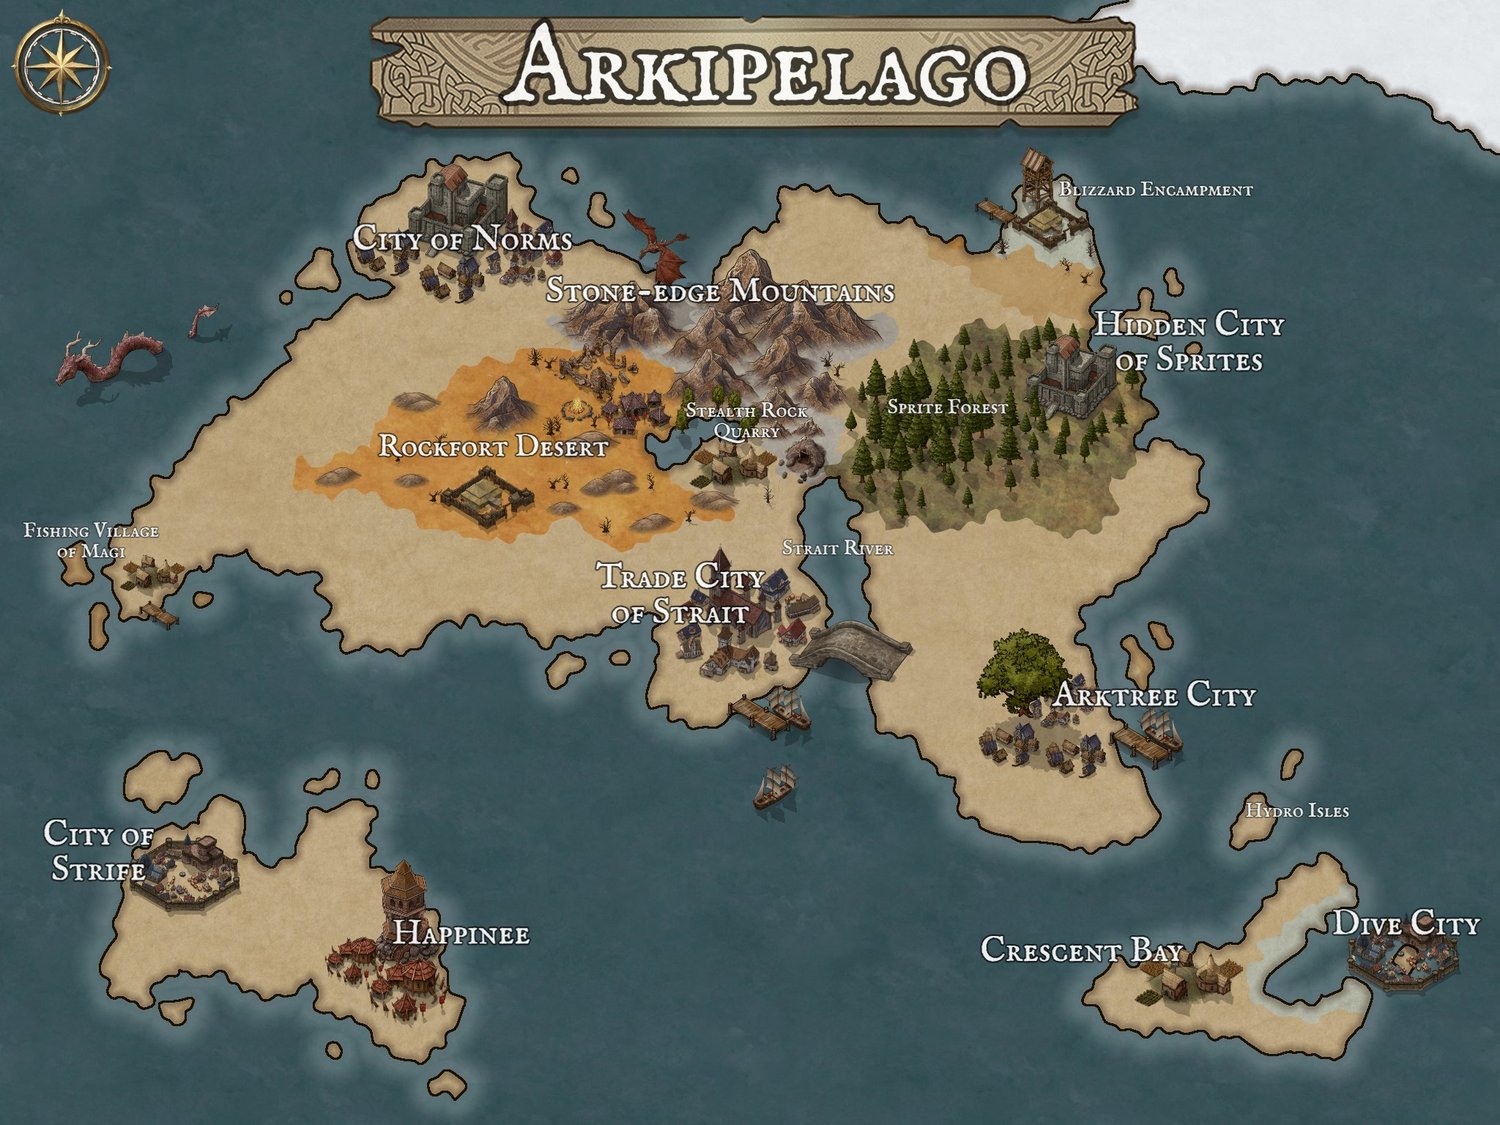 the map of a fictional world called Arkipelago, an island continent filled with fantasy creatures